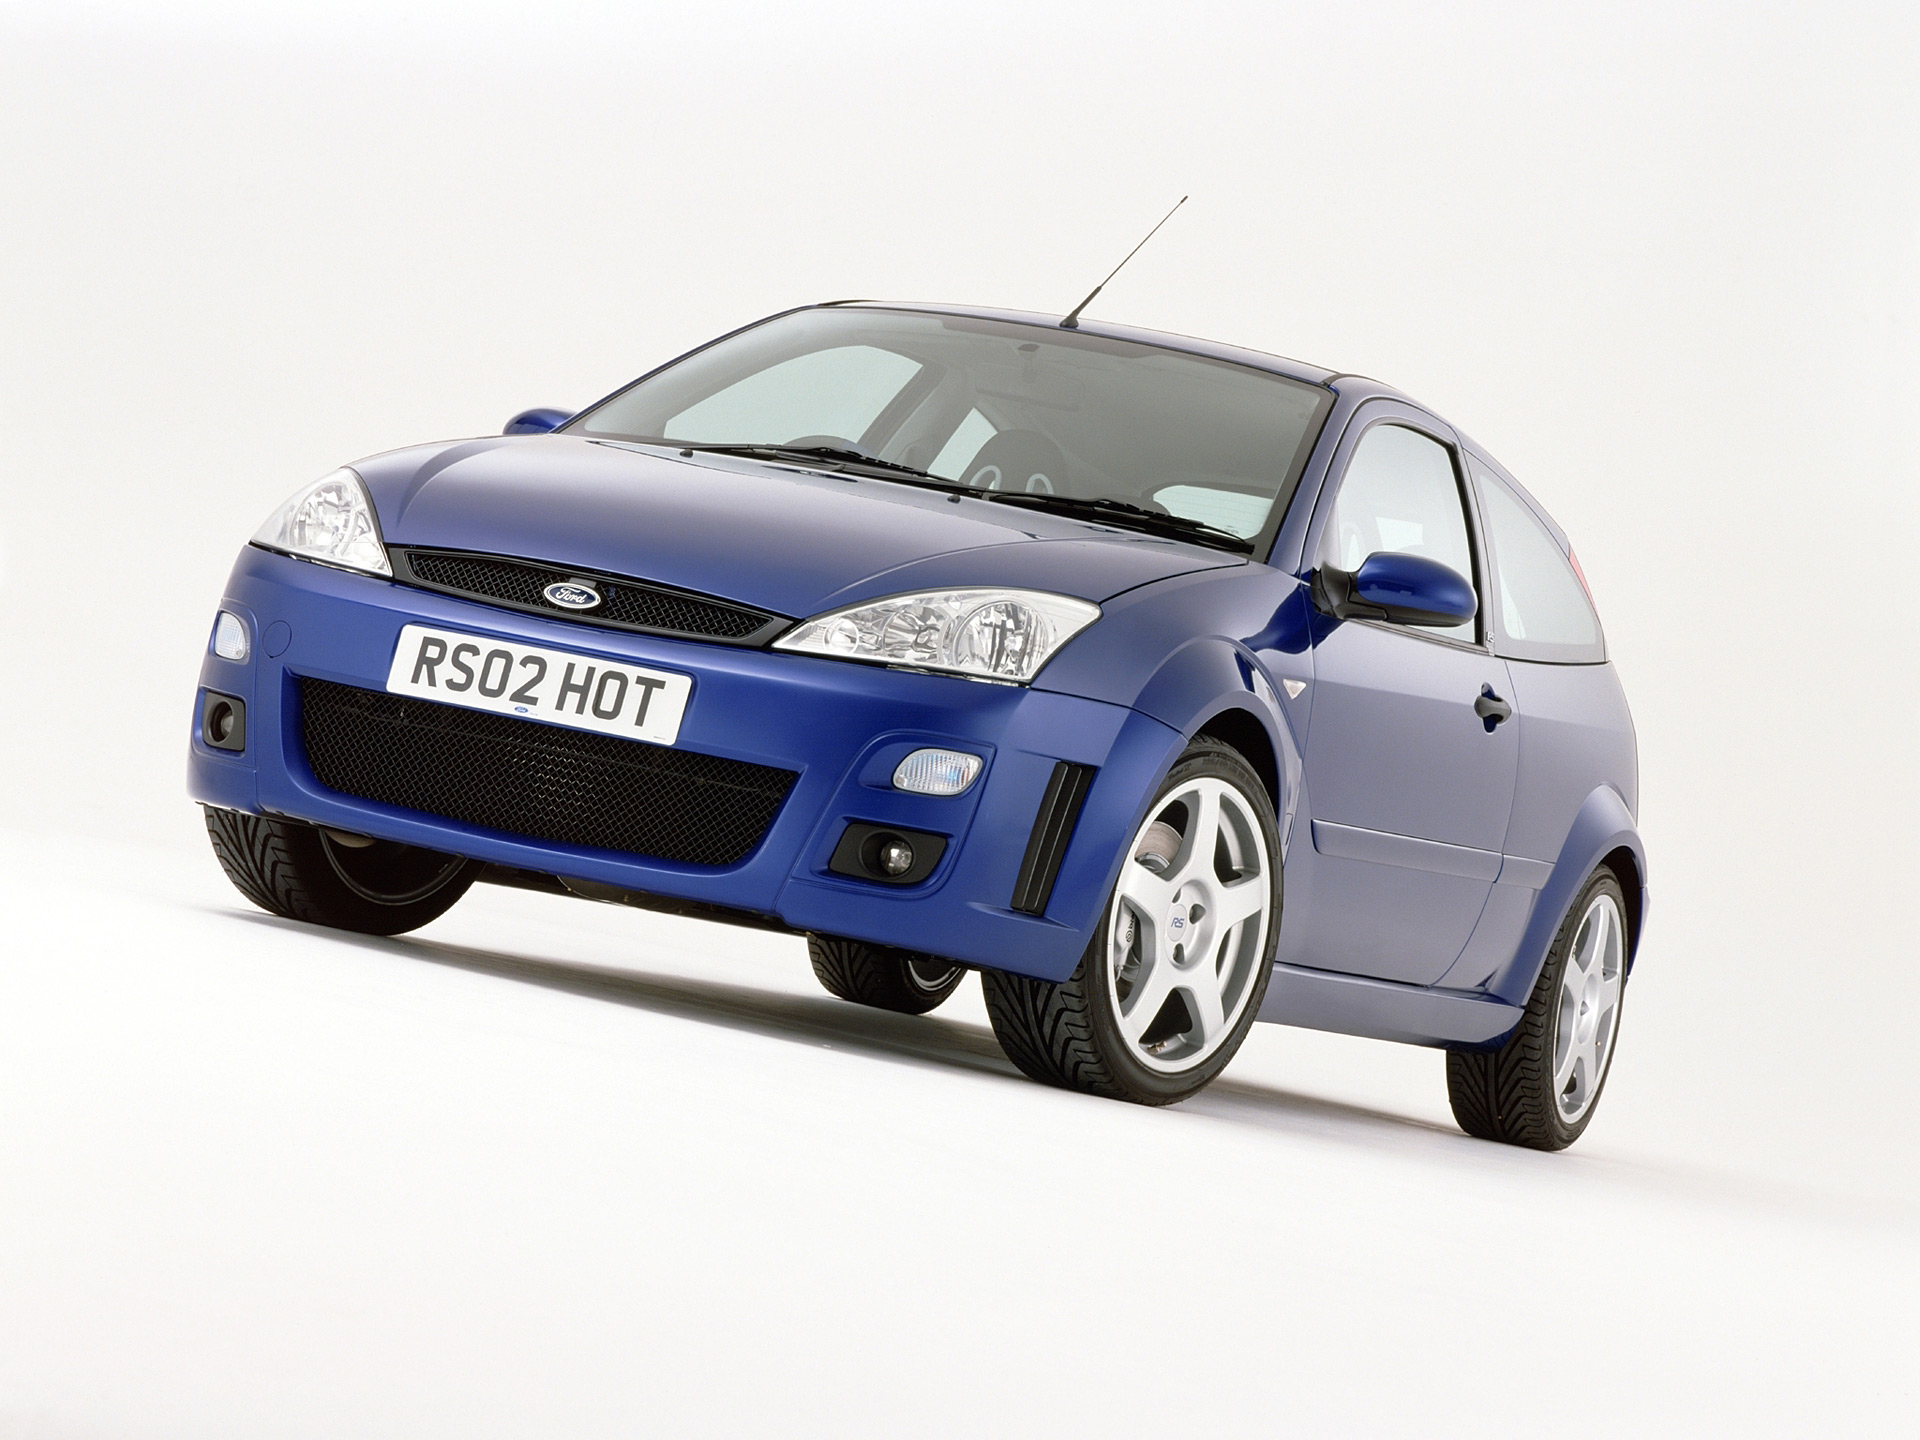  2002 Ford Focus RS Wallpaper.